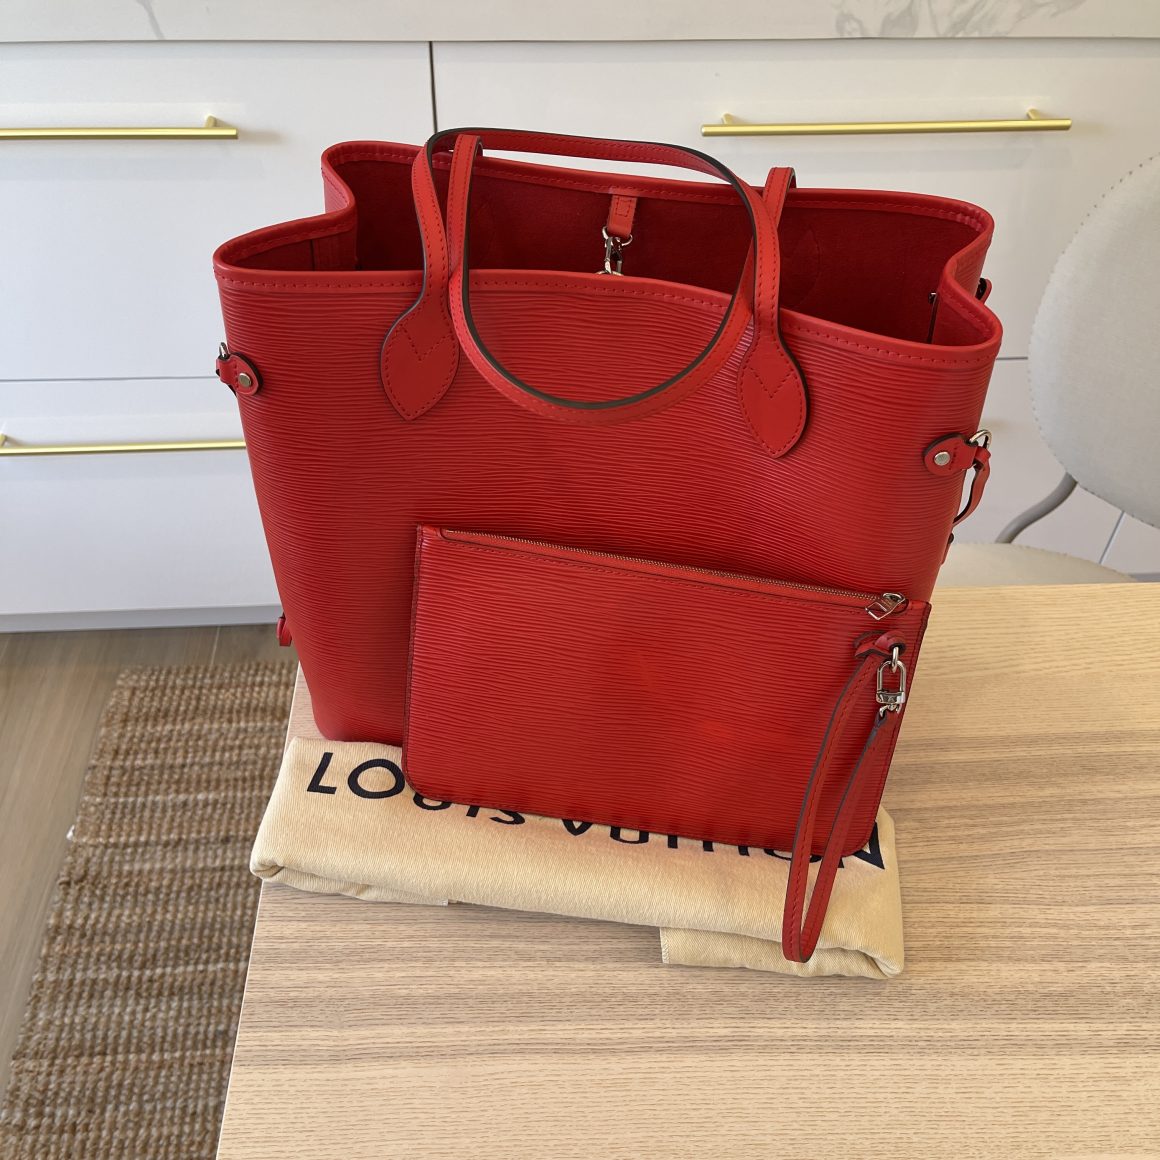 Authentic LOUIS VUITTON Neverfull MM Epi Tote Bag M41318 Red